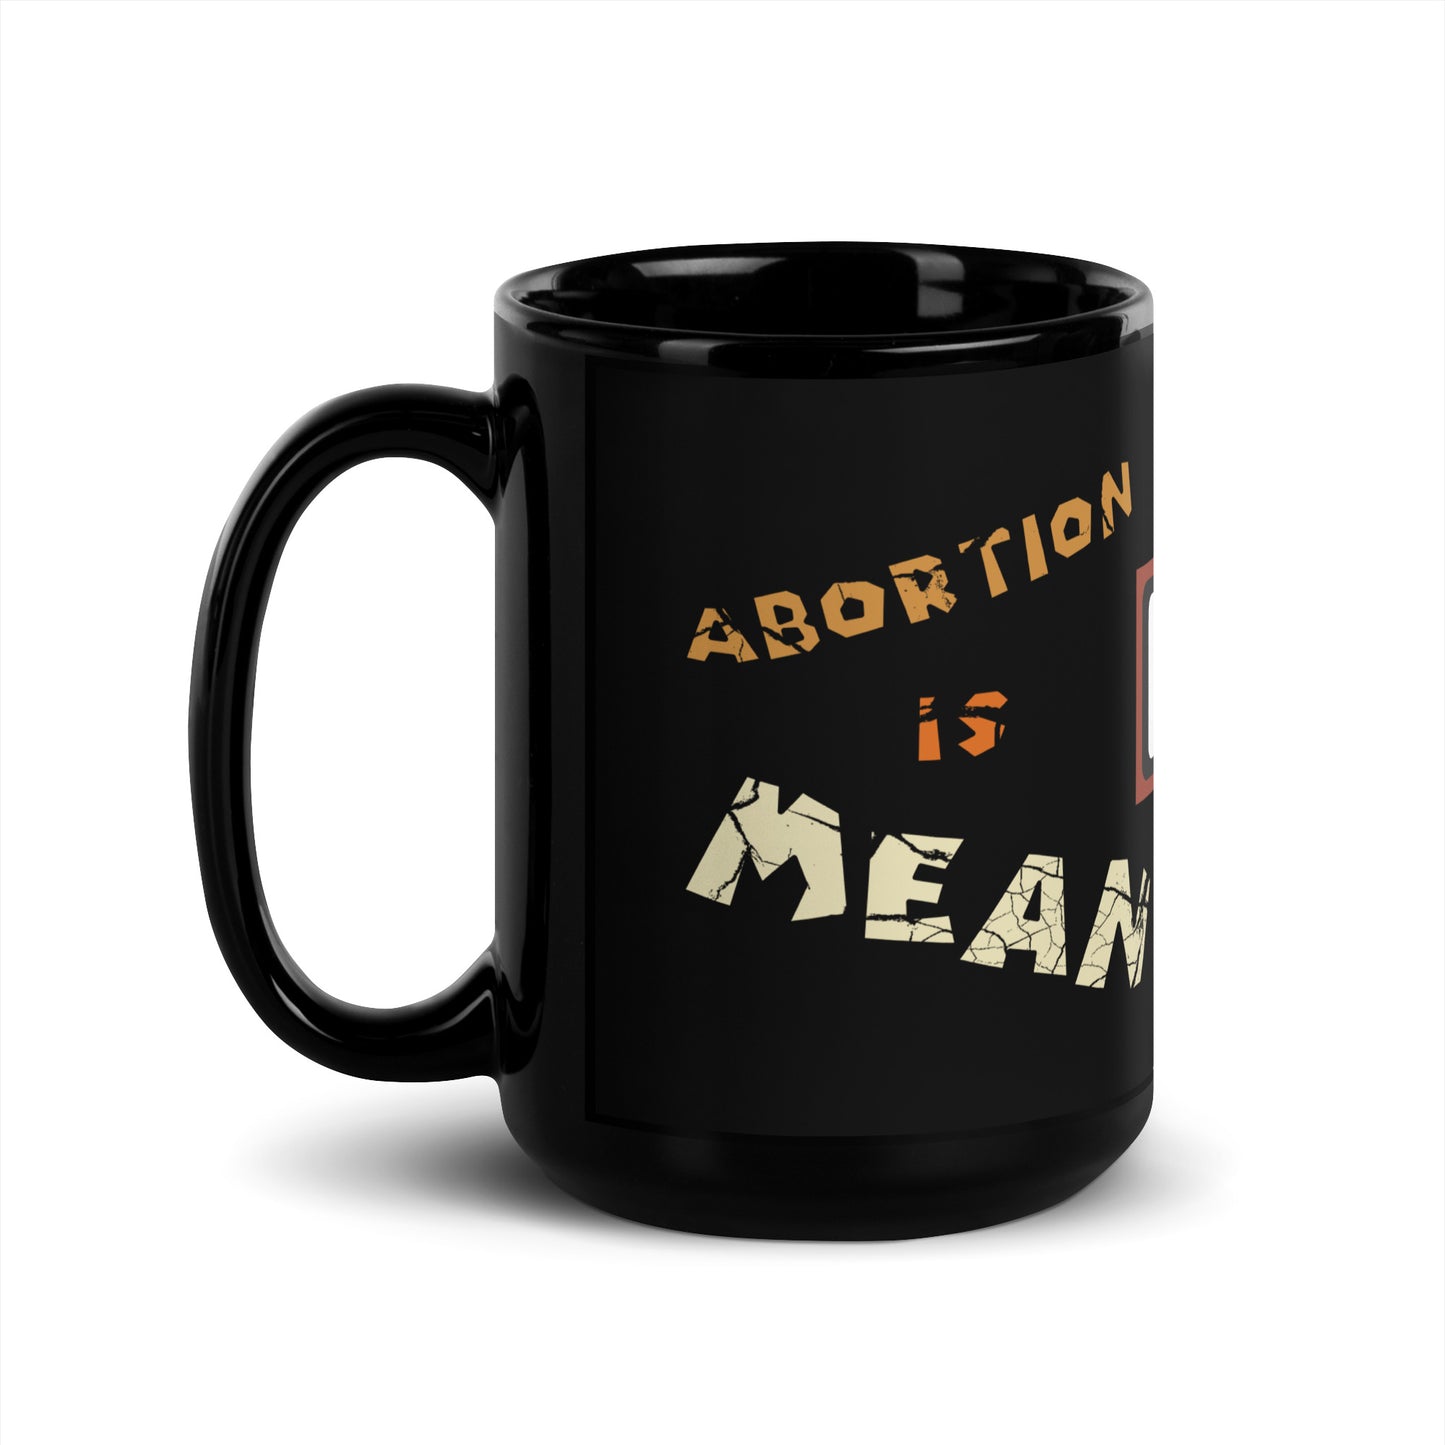 A001 Mug - Black Glossy Ceramic Mug Featuring Sinister Eyes Graphic with text “Abortion is Mean. Don’t be Mean.”